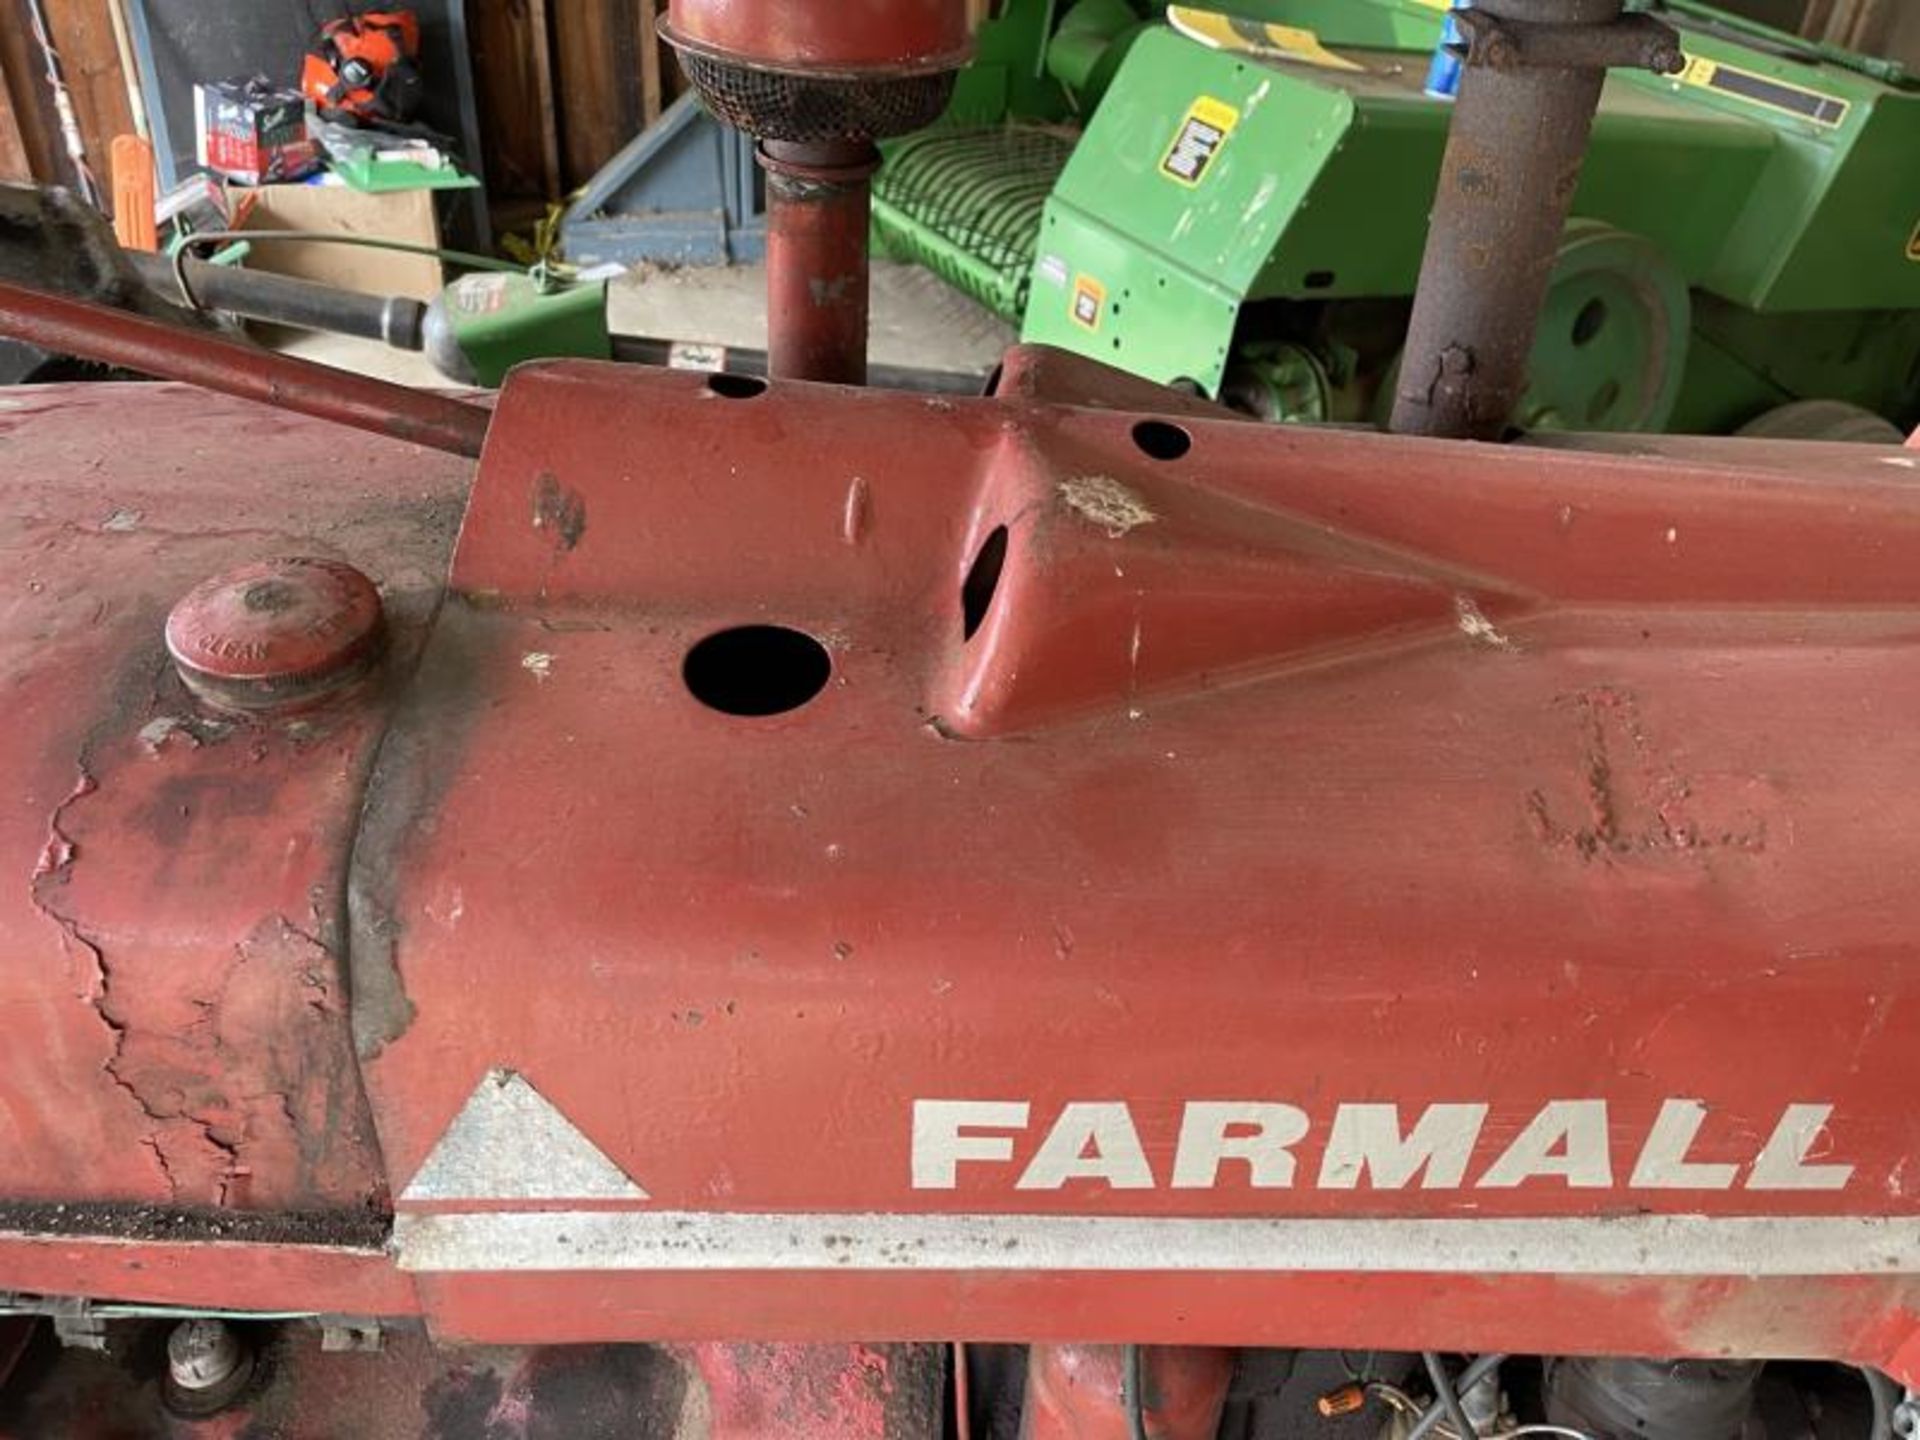 Farmall Tractor Believed To Be 1954, Row-CropFarmall Tractor Believed To Be 1954, Row-Crop - Image 27 of 35